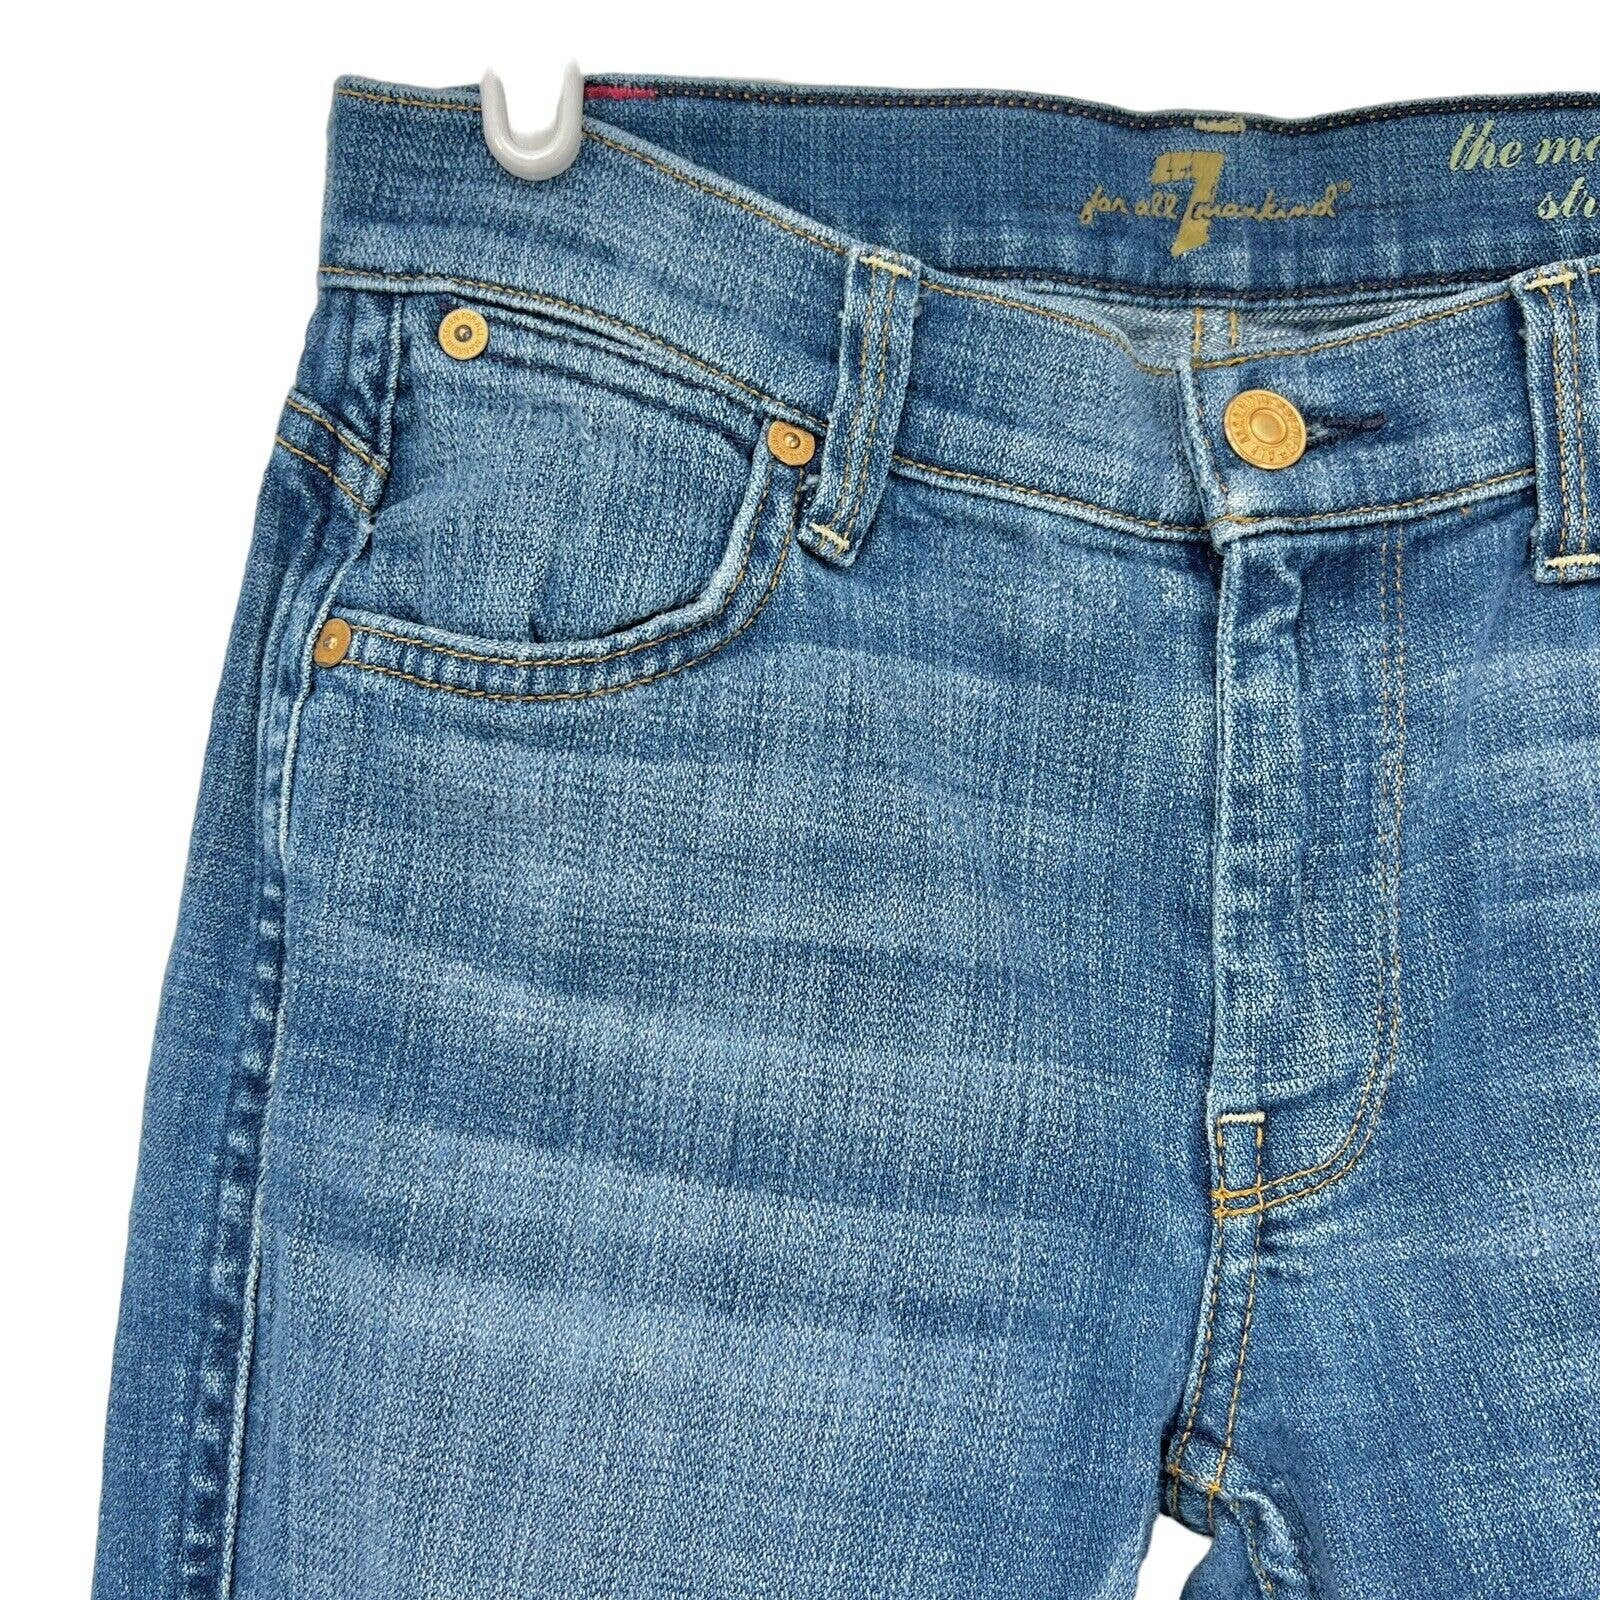 high discount 7 for all mankind Womens Modern Straight Leg Mid Rise Blue Jeans Size 25 (26x31) G7i2lHTro well sale